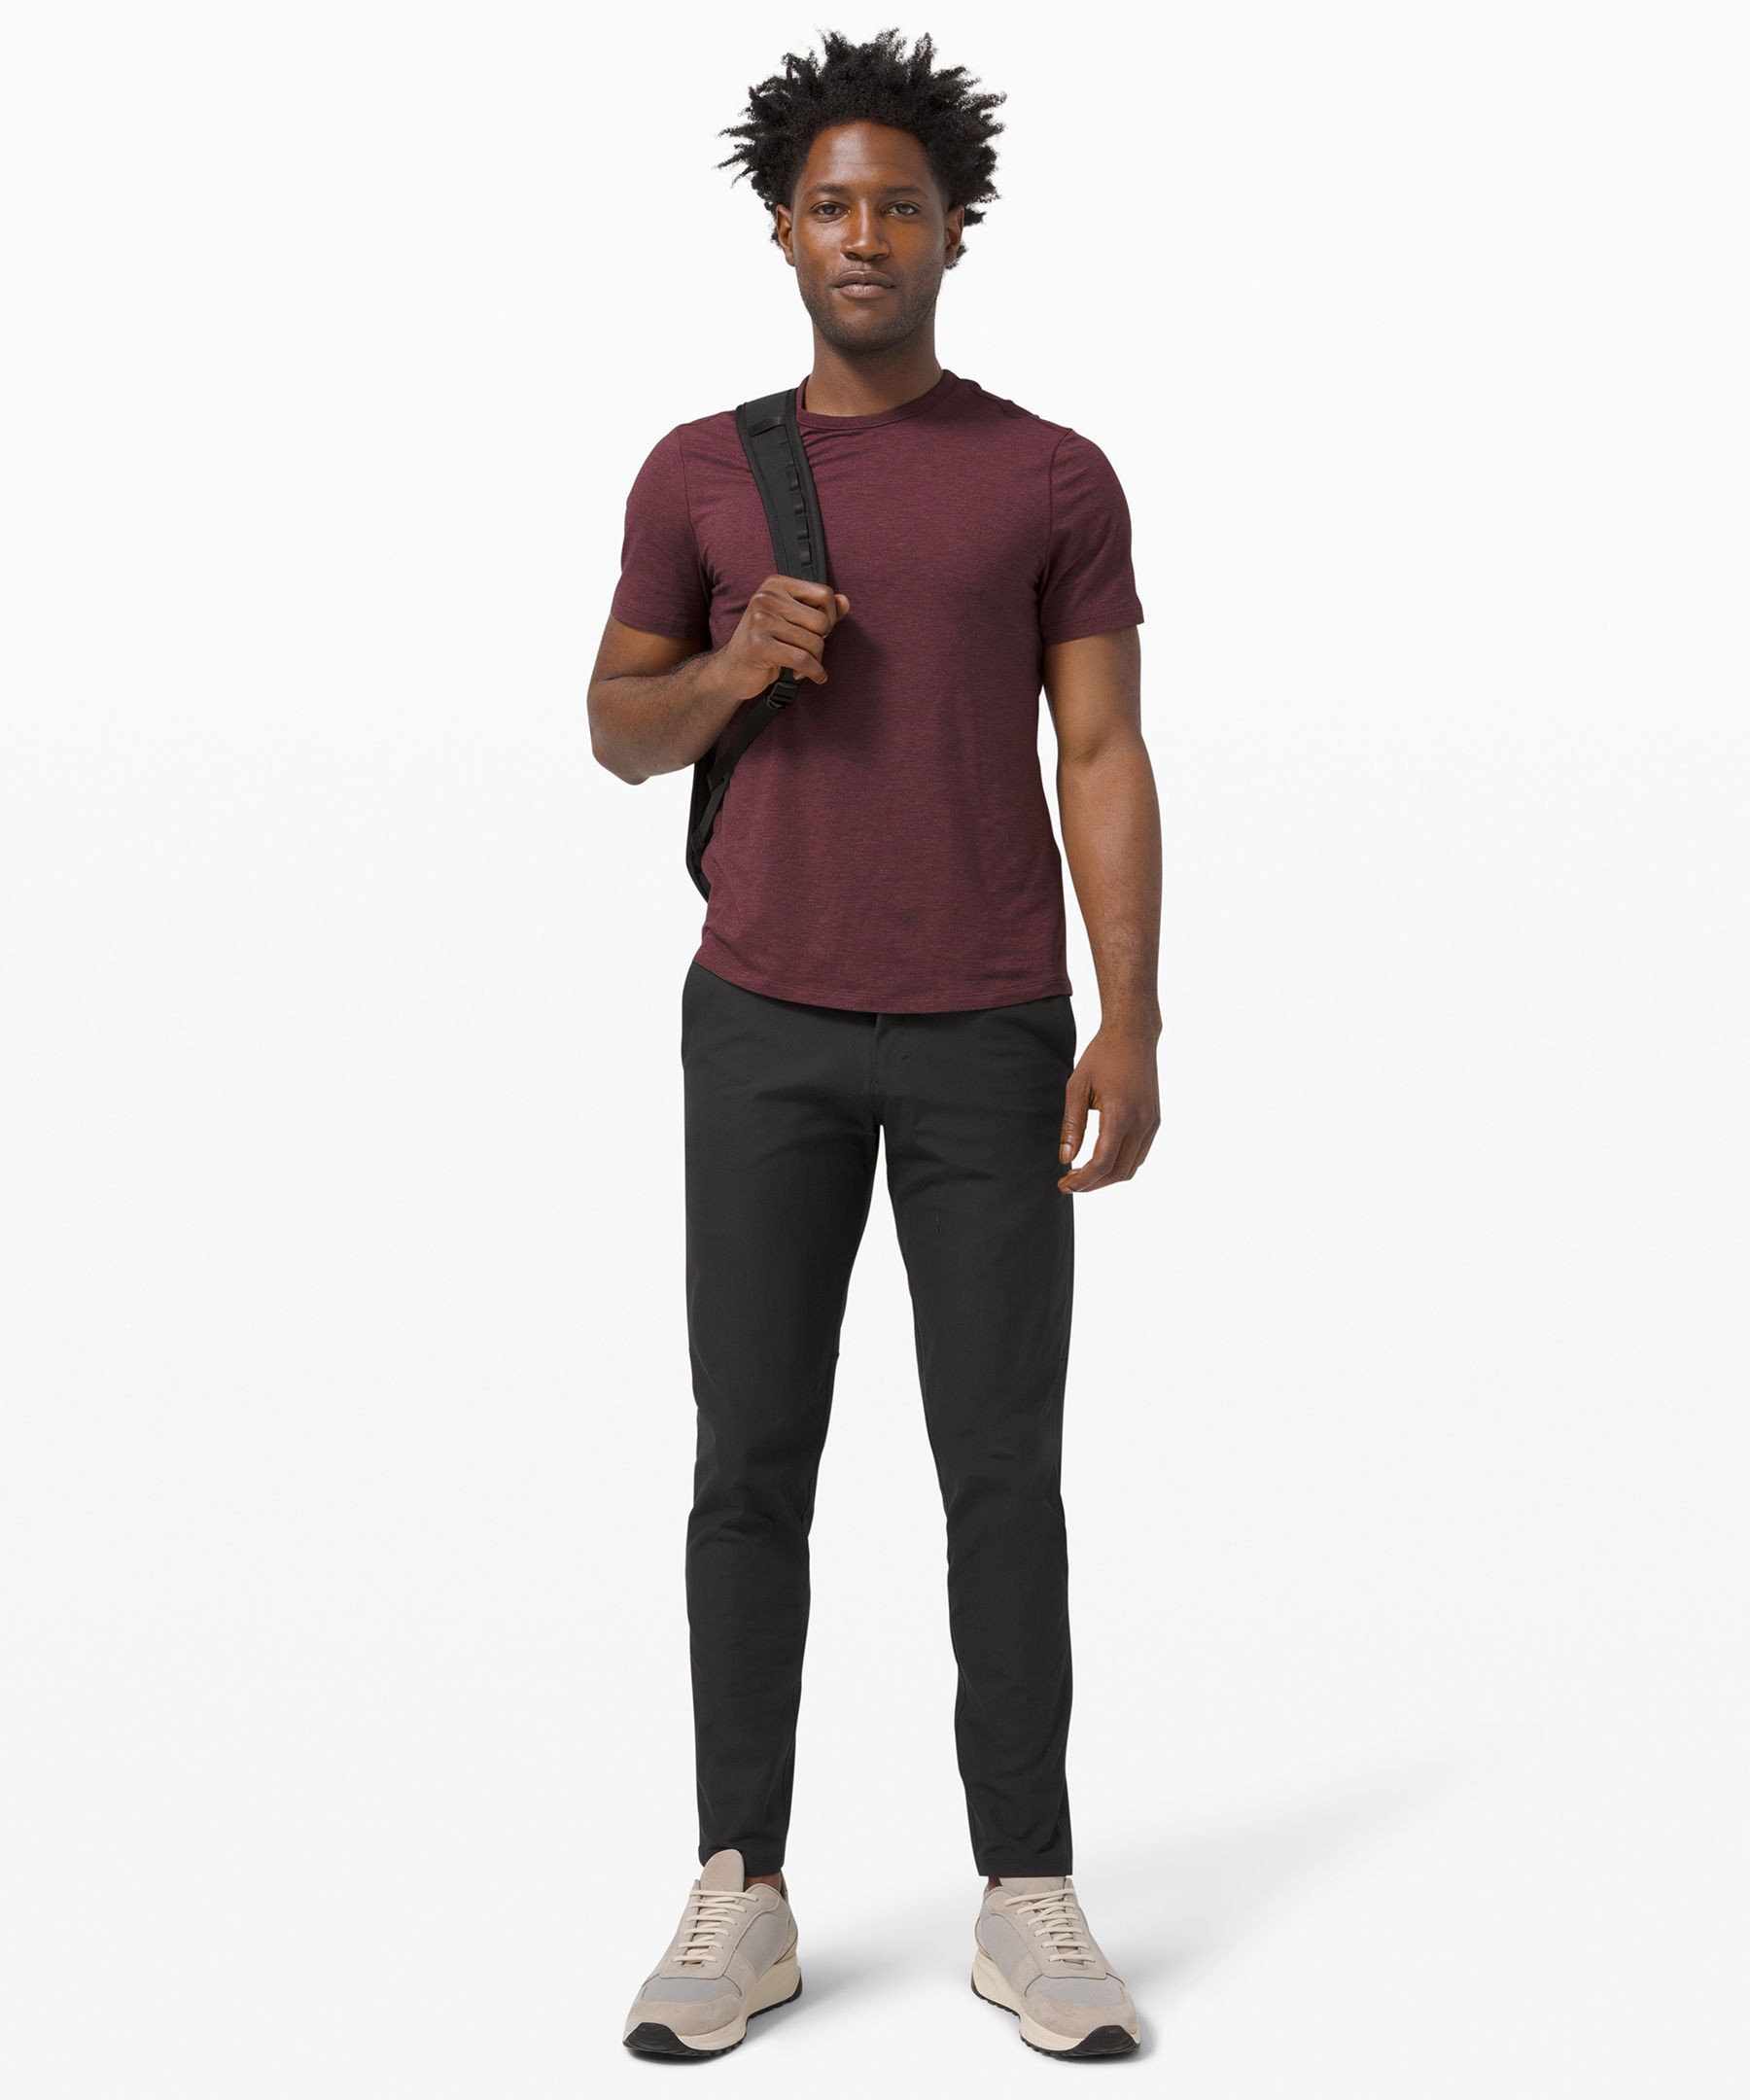 The Top 10 Affordable Tech / Performance Pants for Men